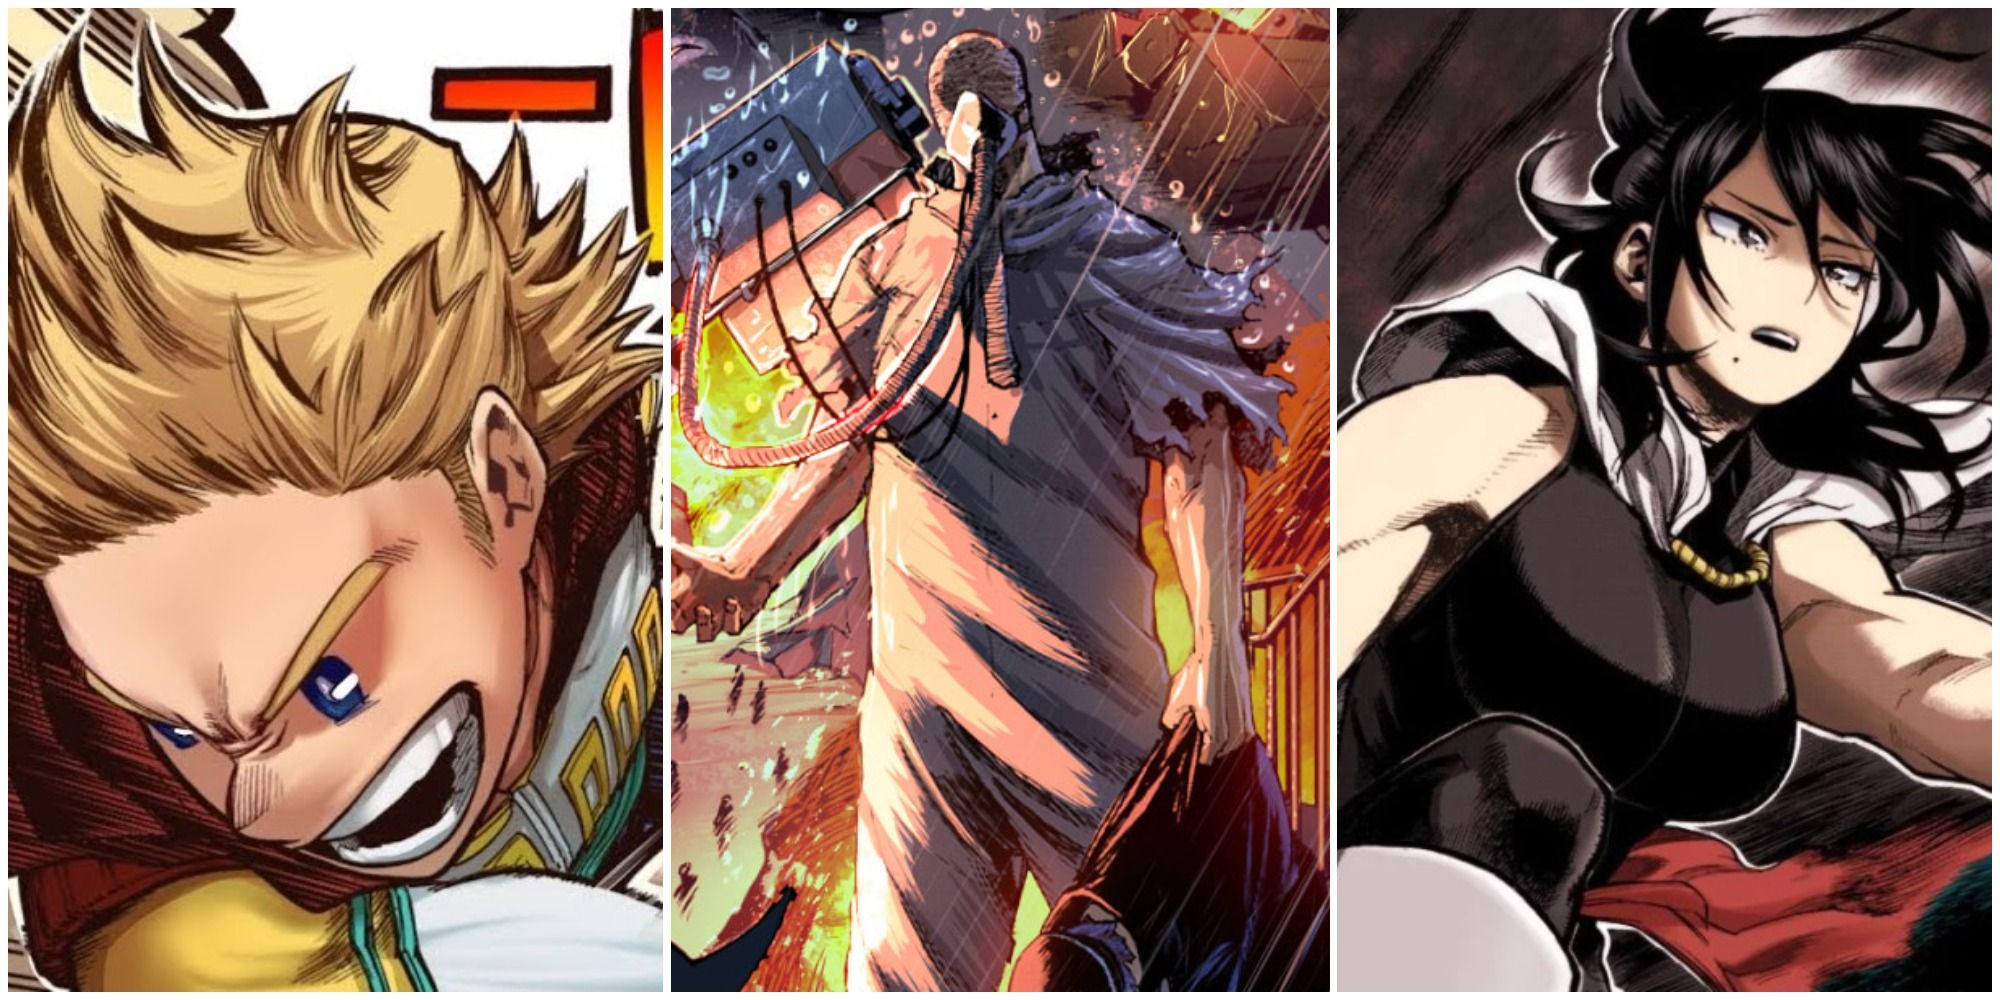  My  Hero  Academia  10 Things About The Series Manga Readers 